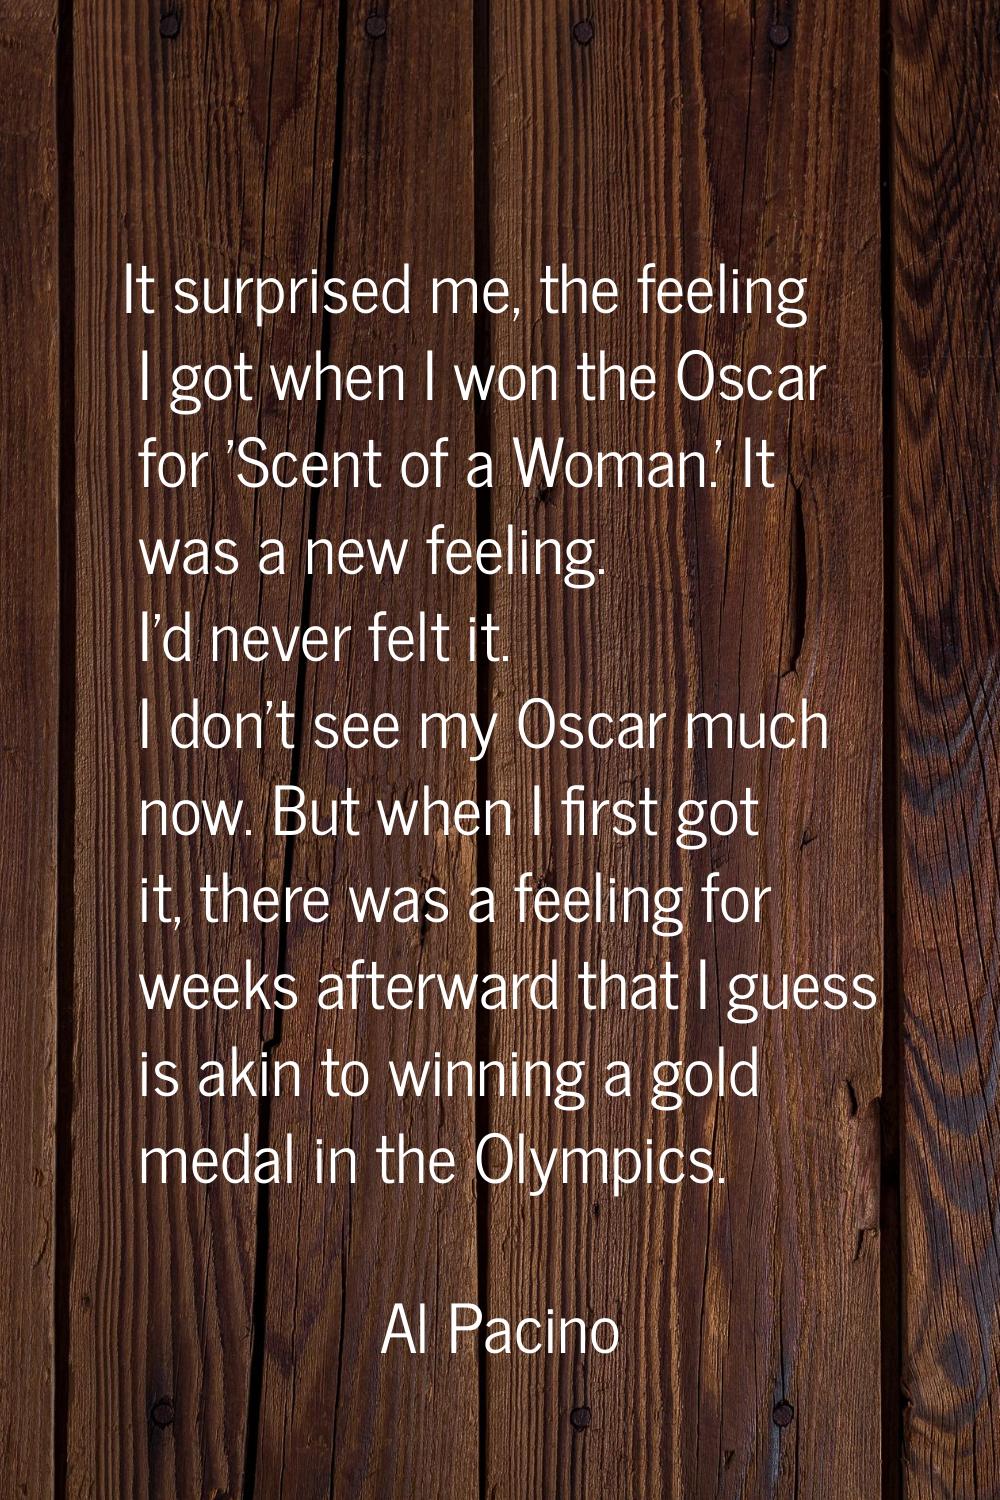 It surprised me, the feeling I got when I won the Oscar for 'Scent of a Woman.' It was a new feelin